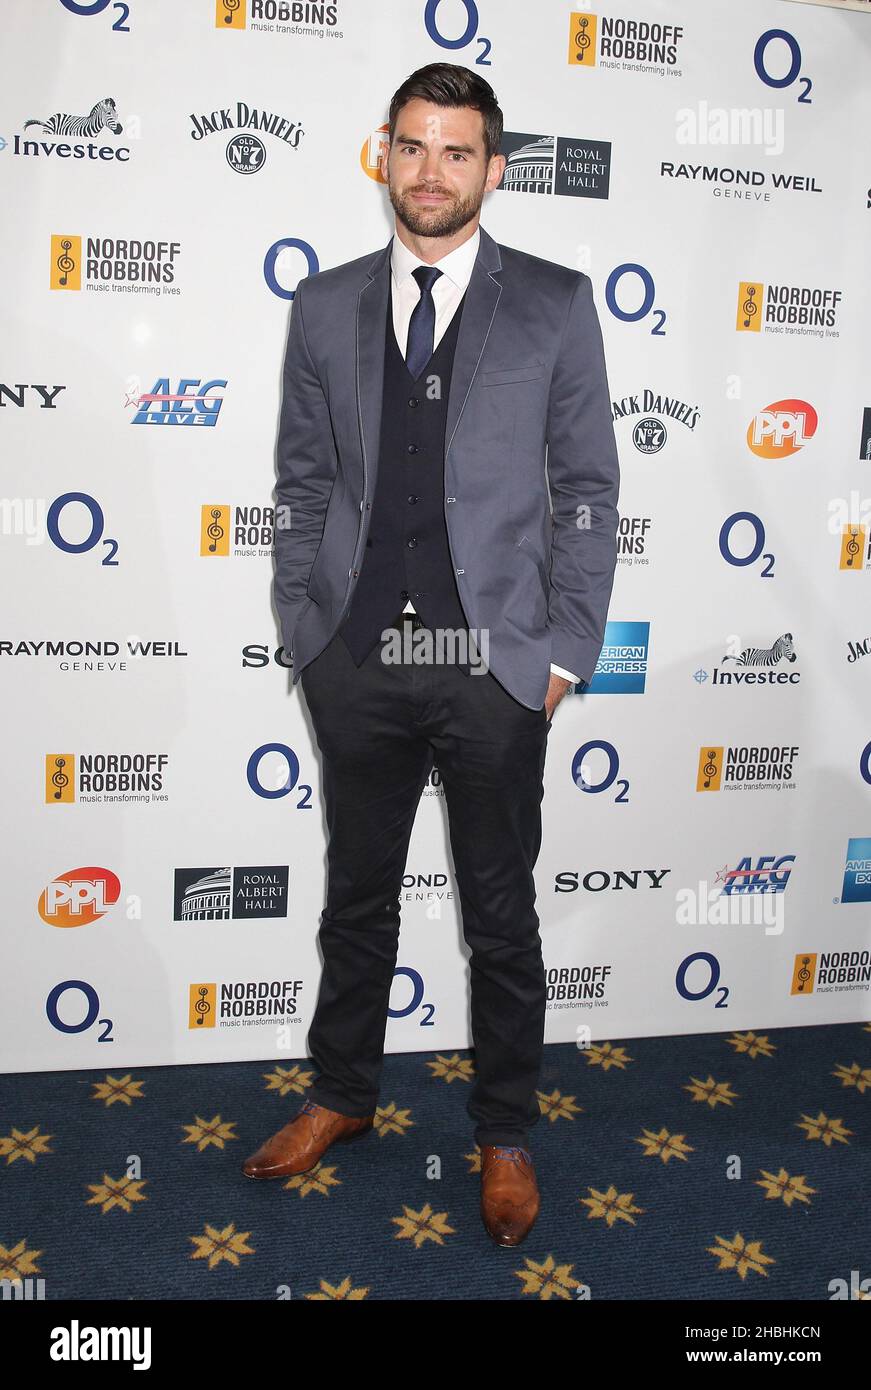 Jimmy Anderson cricketer attends the Nordoff Robbins 02 Silver Clef Awards at the London Hilton Park Lane Hotel in London. Stock Photo